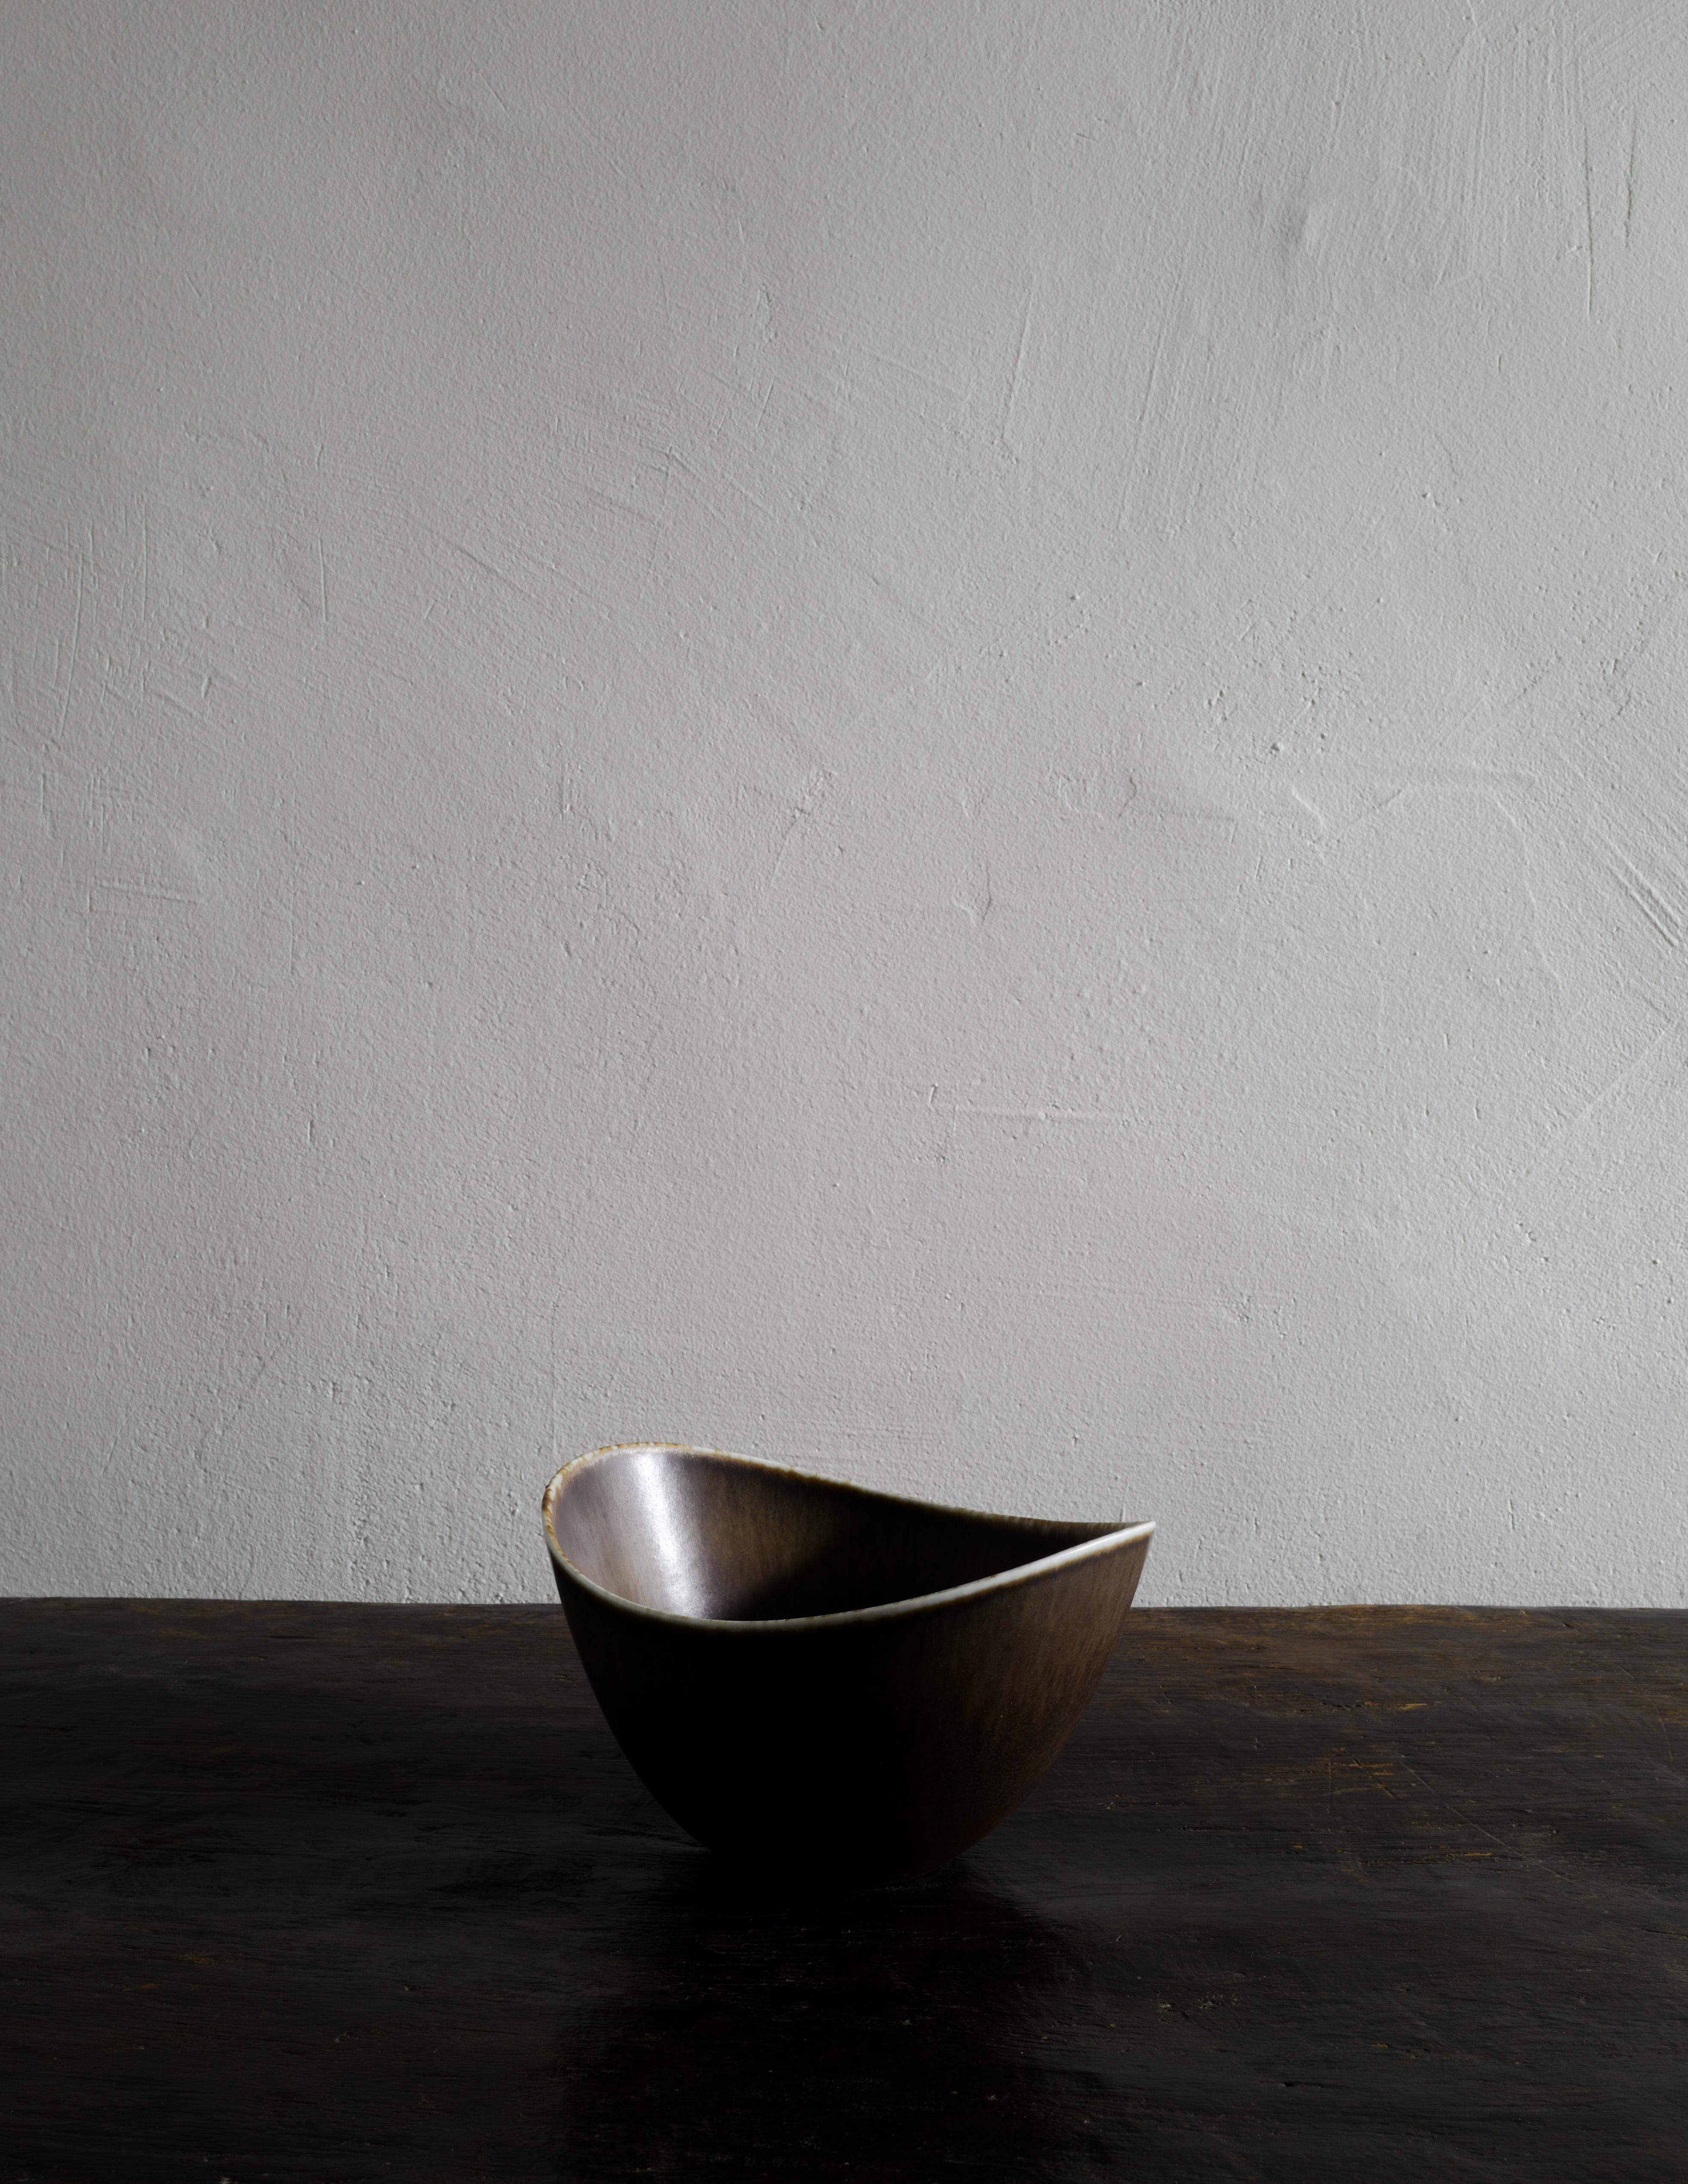 Rare ad beautiful bowl by Gunnar Nylund in a black dark brown glaze for Rörstrand produced in the 1950s. In good vintage condition with small signs from age and use. Signed 